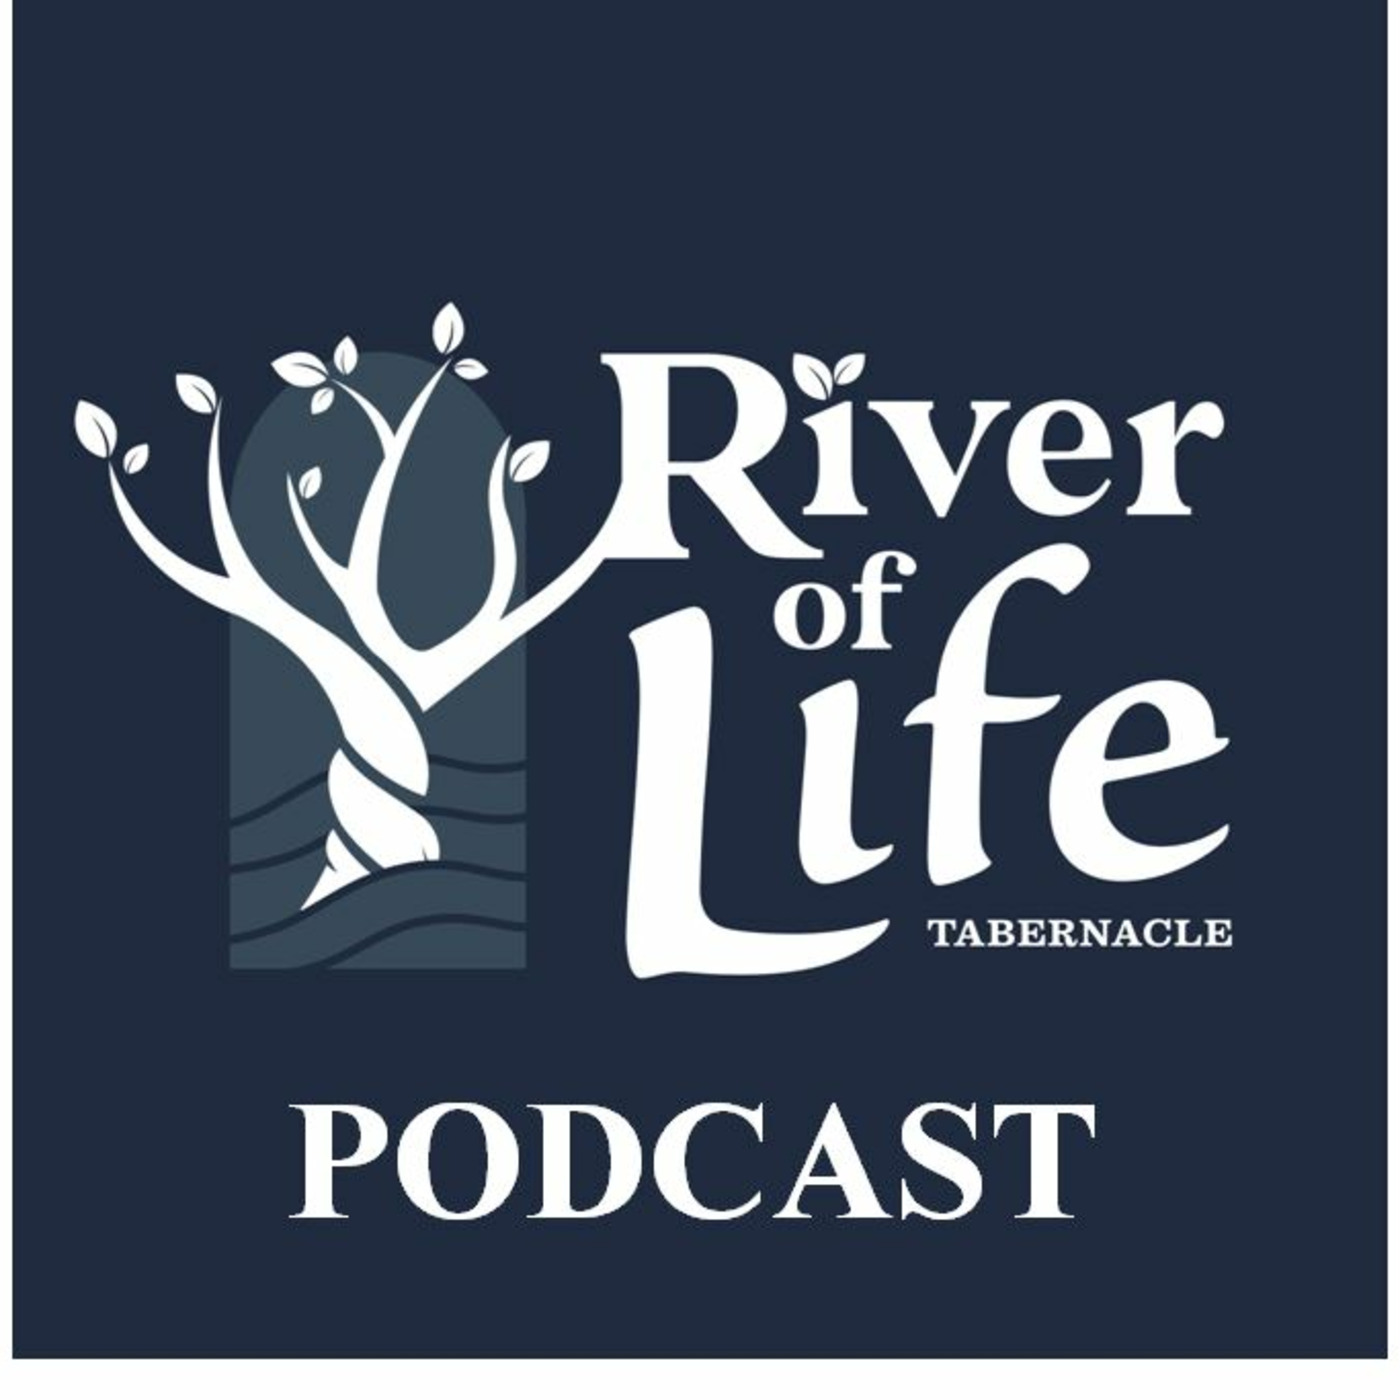 River of Life Tabernacle's Podcast